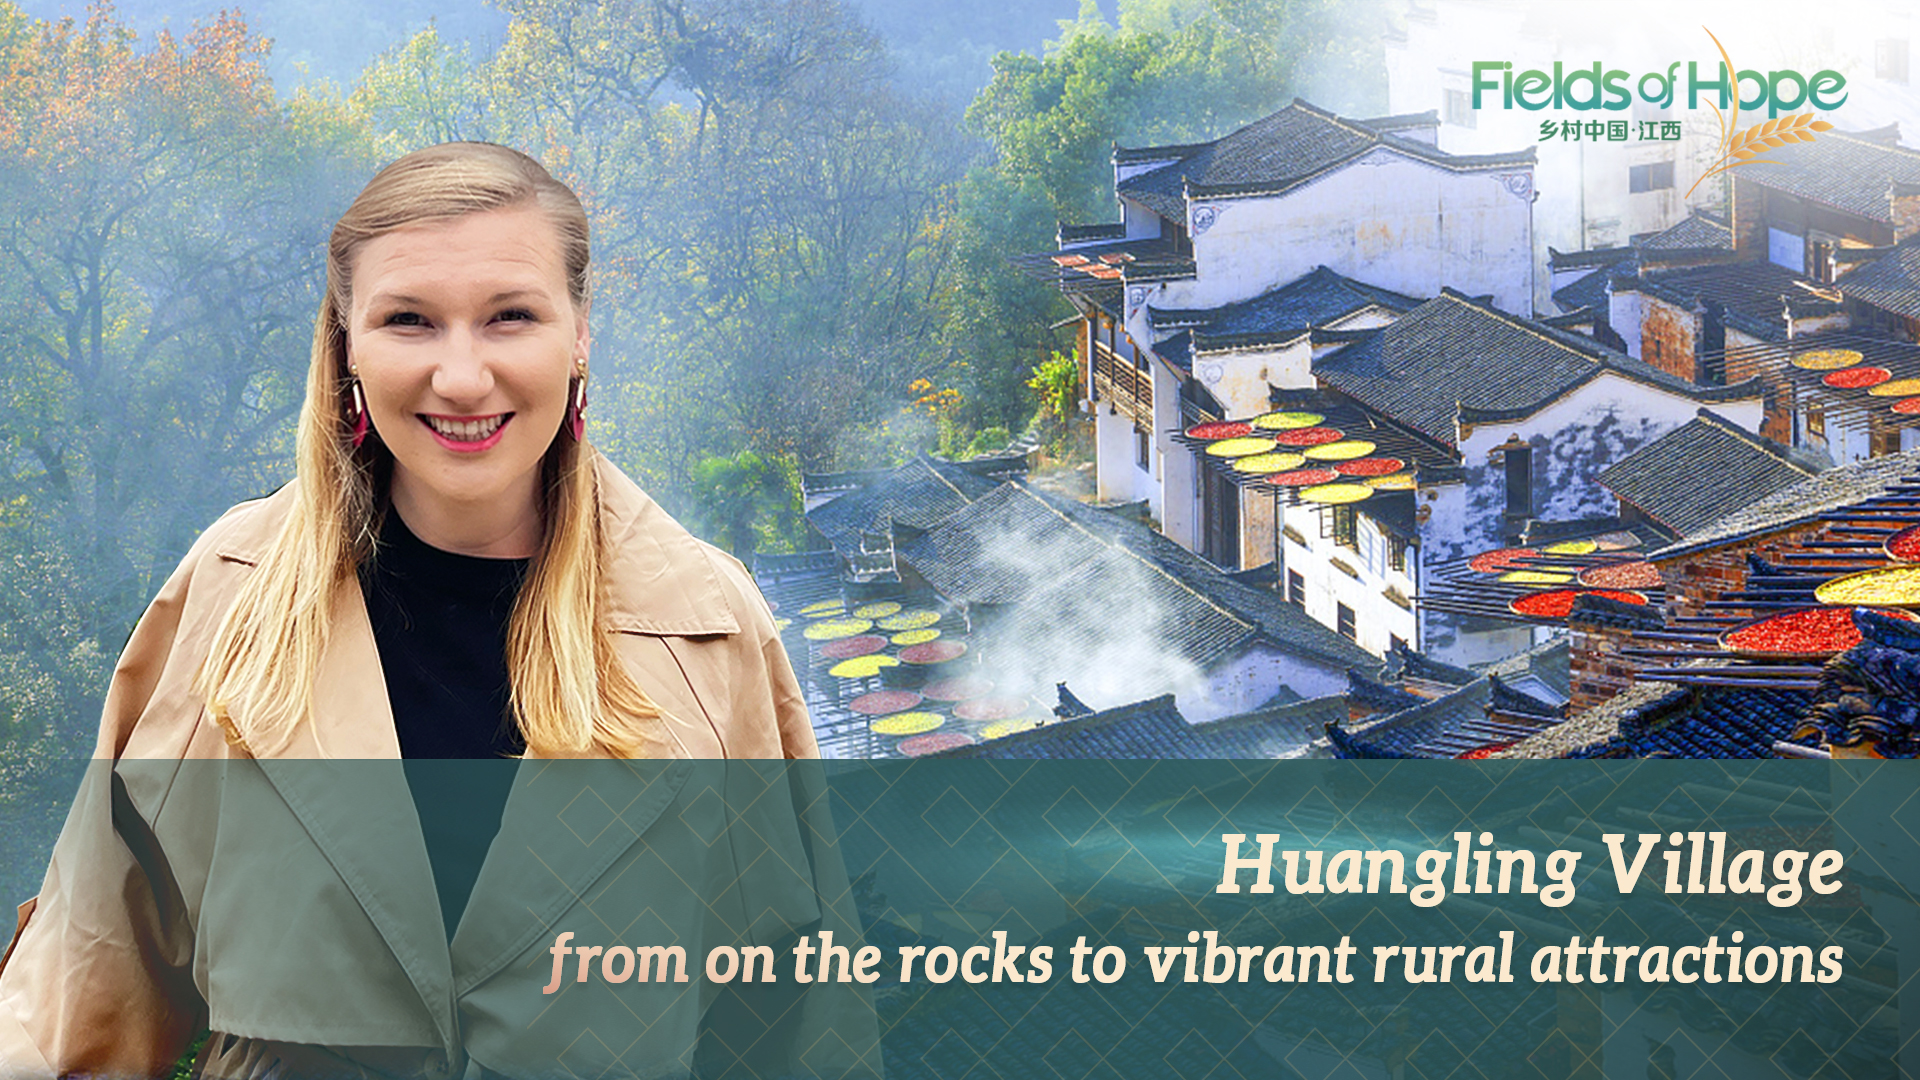 Live: Huangling Village, from the rocks to a vibrant rural attraction